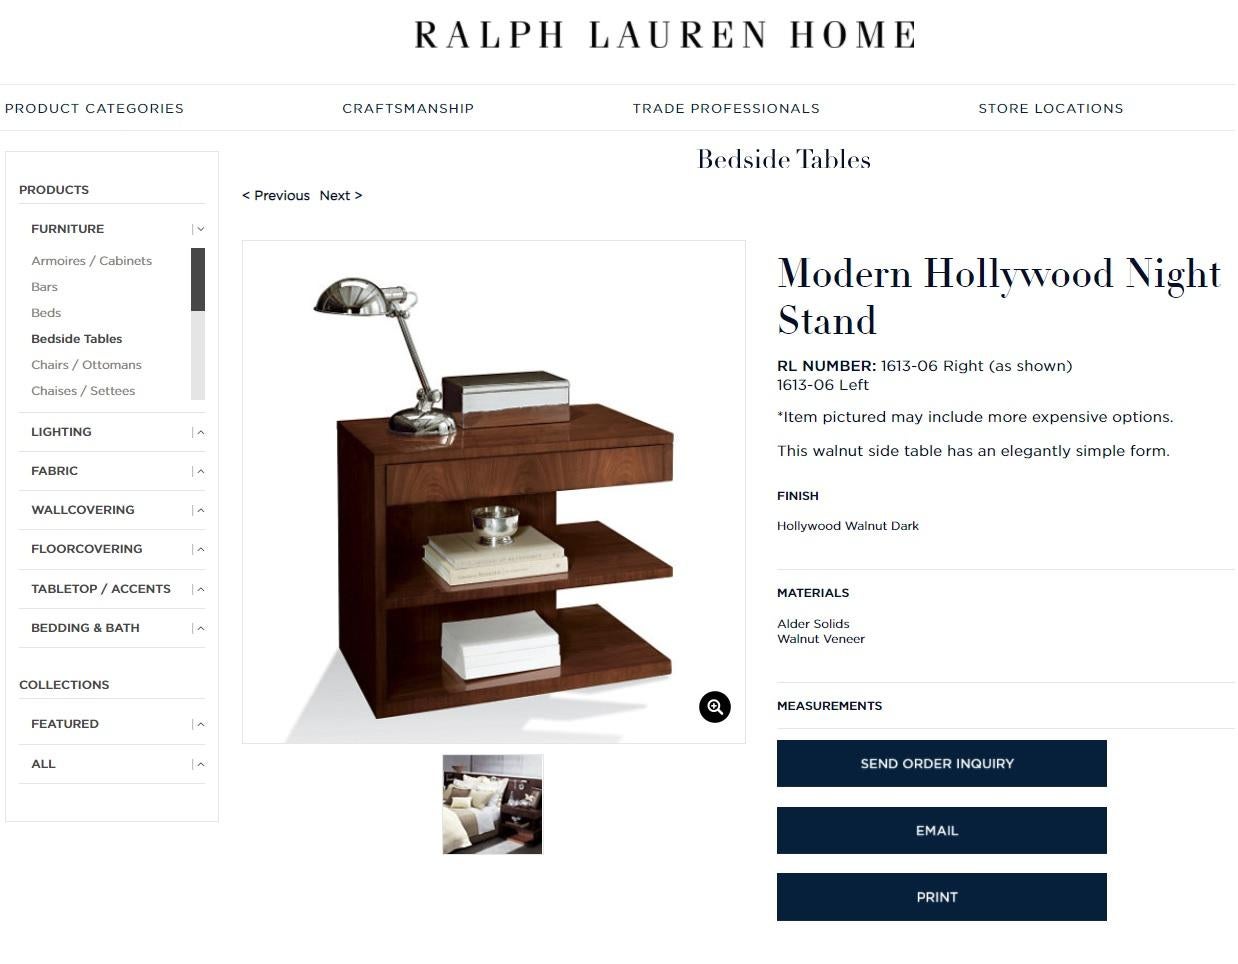 We are delighted to offer for sale this lovely pair of Ralph Lauren Modern Hollywood nightstands in walnut

A very substantial and well made pair of side tables or nightstands. They each have twin shelves and large single drawers. They are made